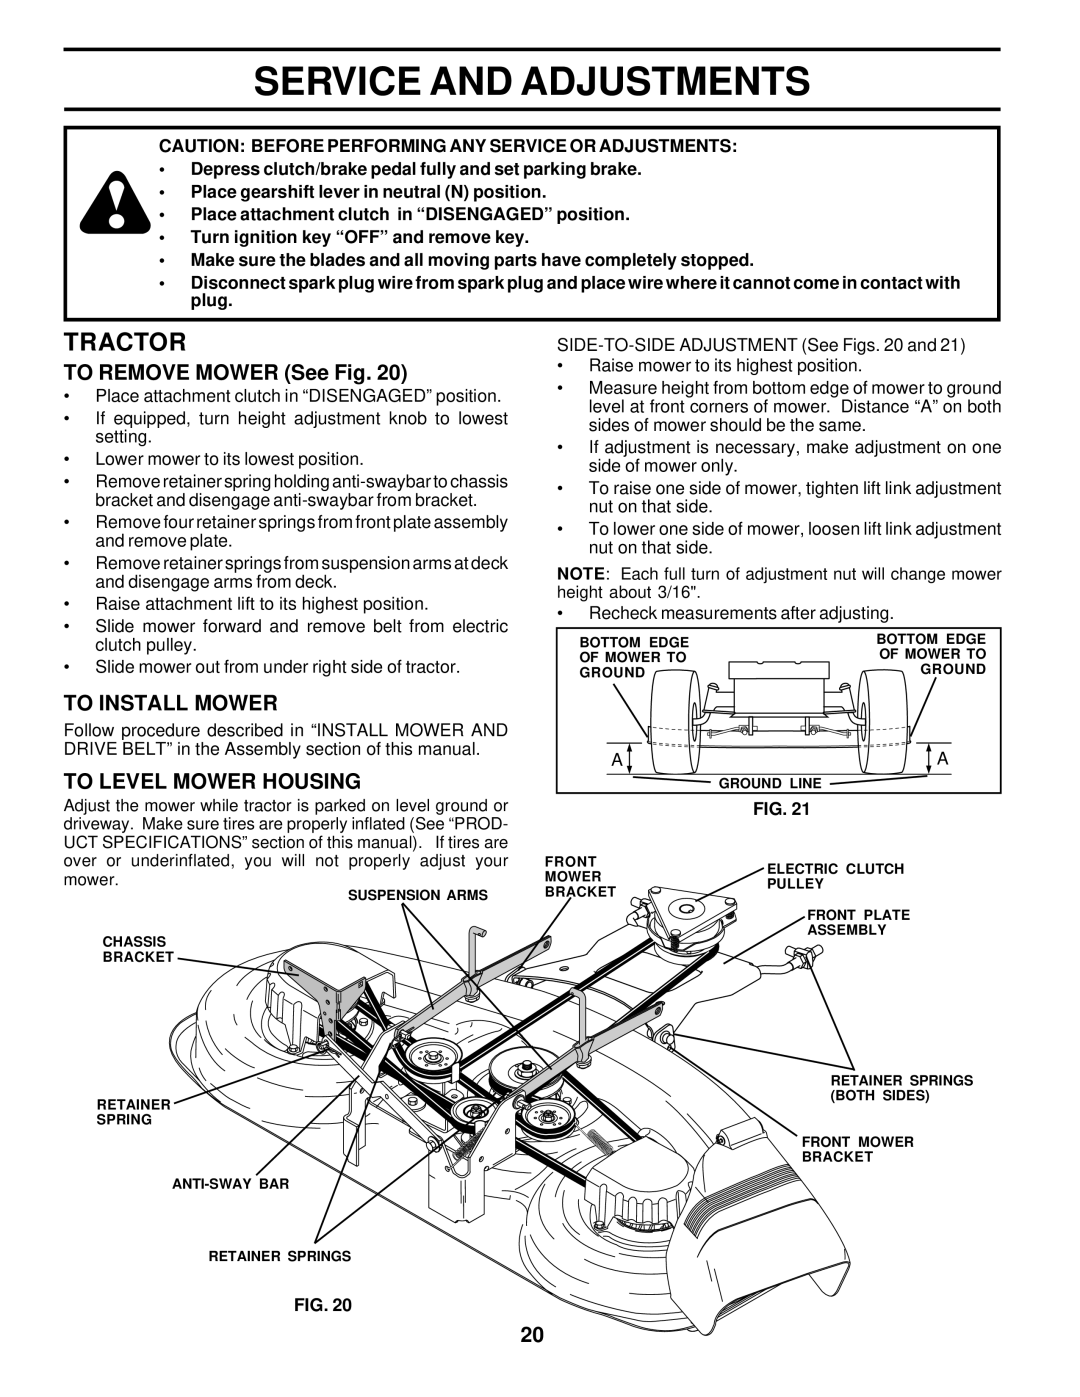 Poulan 178500 owner manual Service and Adjustments, To Remove Mower See Fig, To Install Mower, To Level Mower Housing 